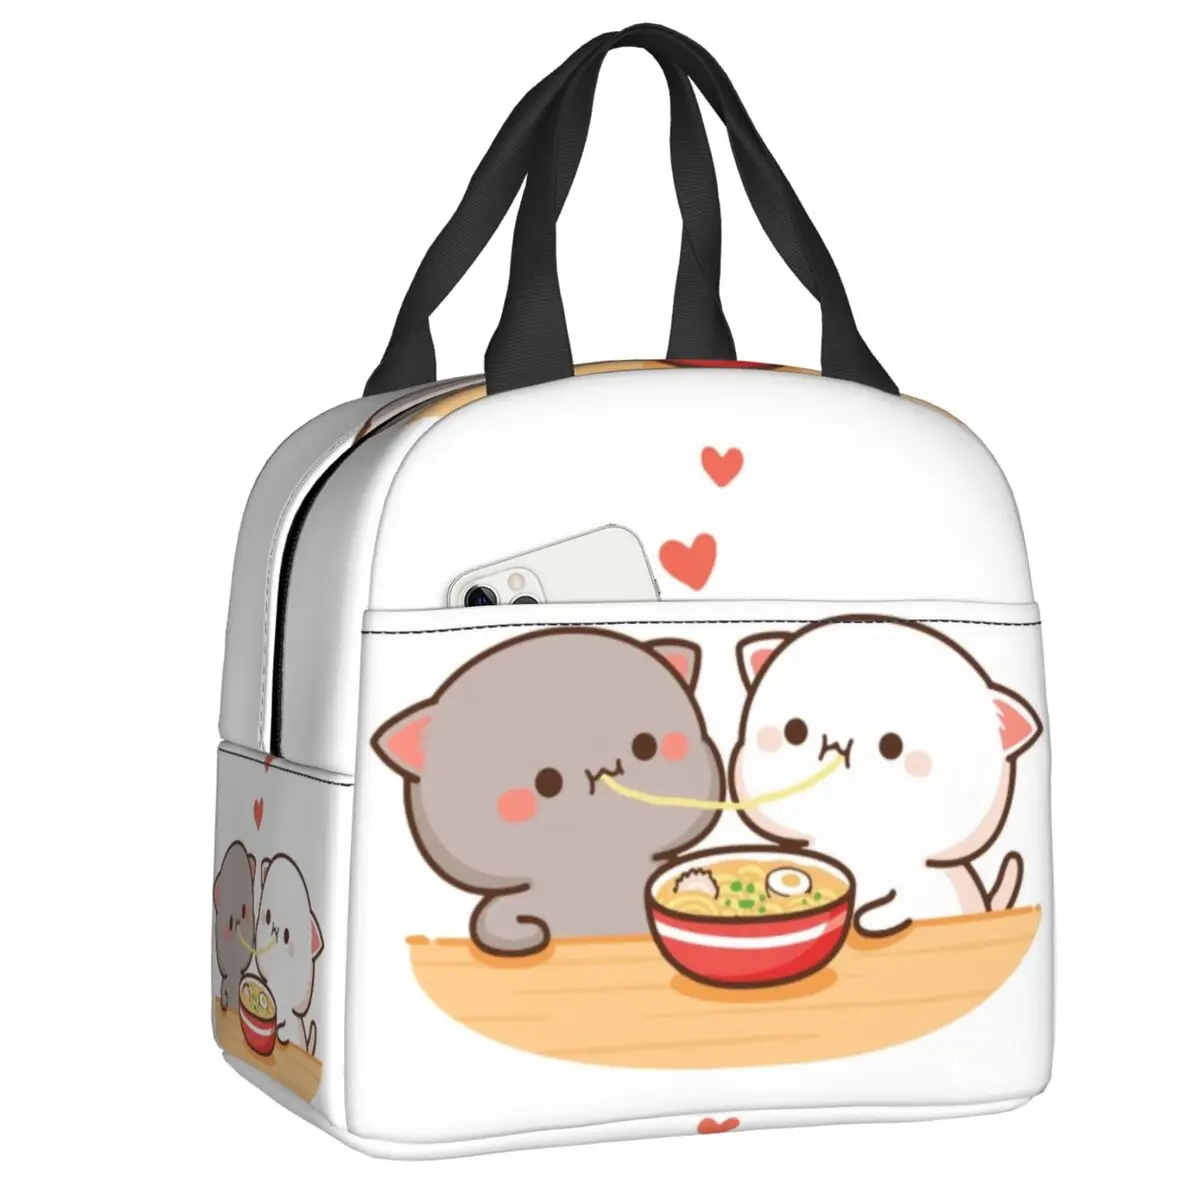 Peach And Goma Mochi Cat Eating Ramen Thermal Insulated Lunch Bags Women Resuable Lunch Container Outdoor Storage Food Box